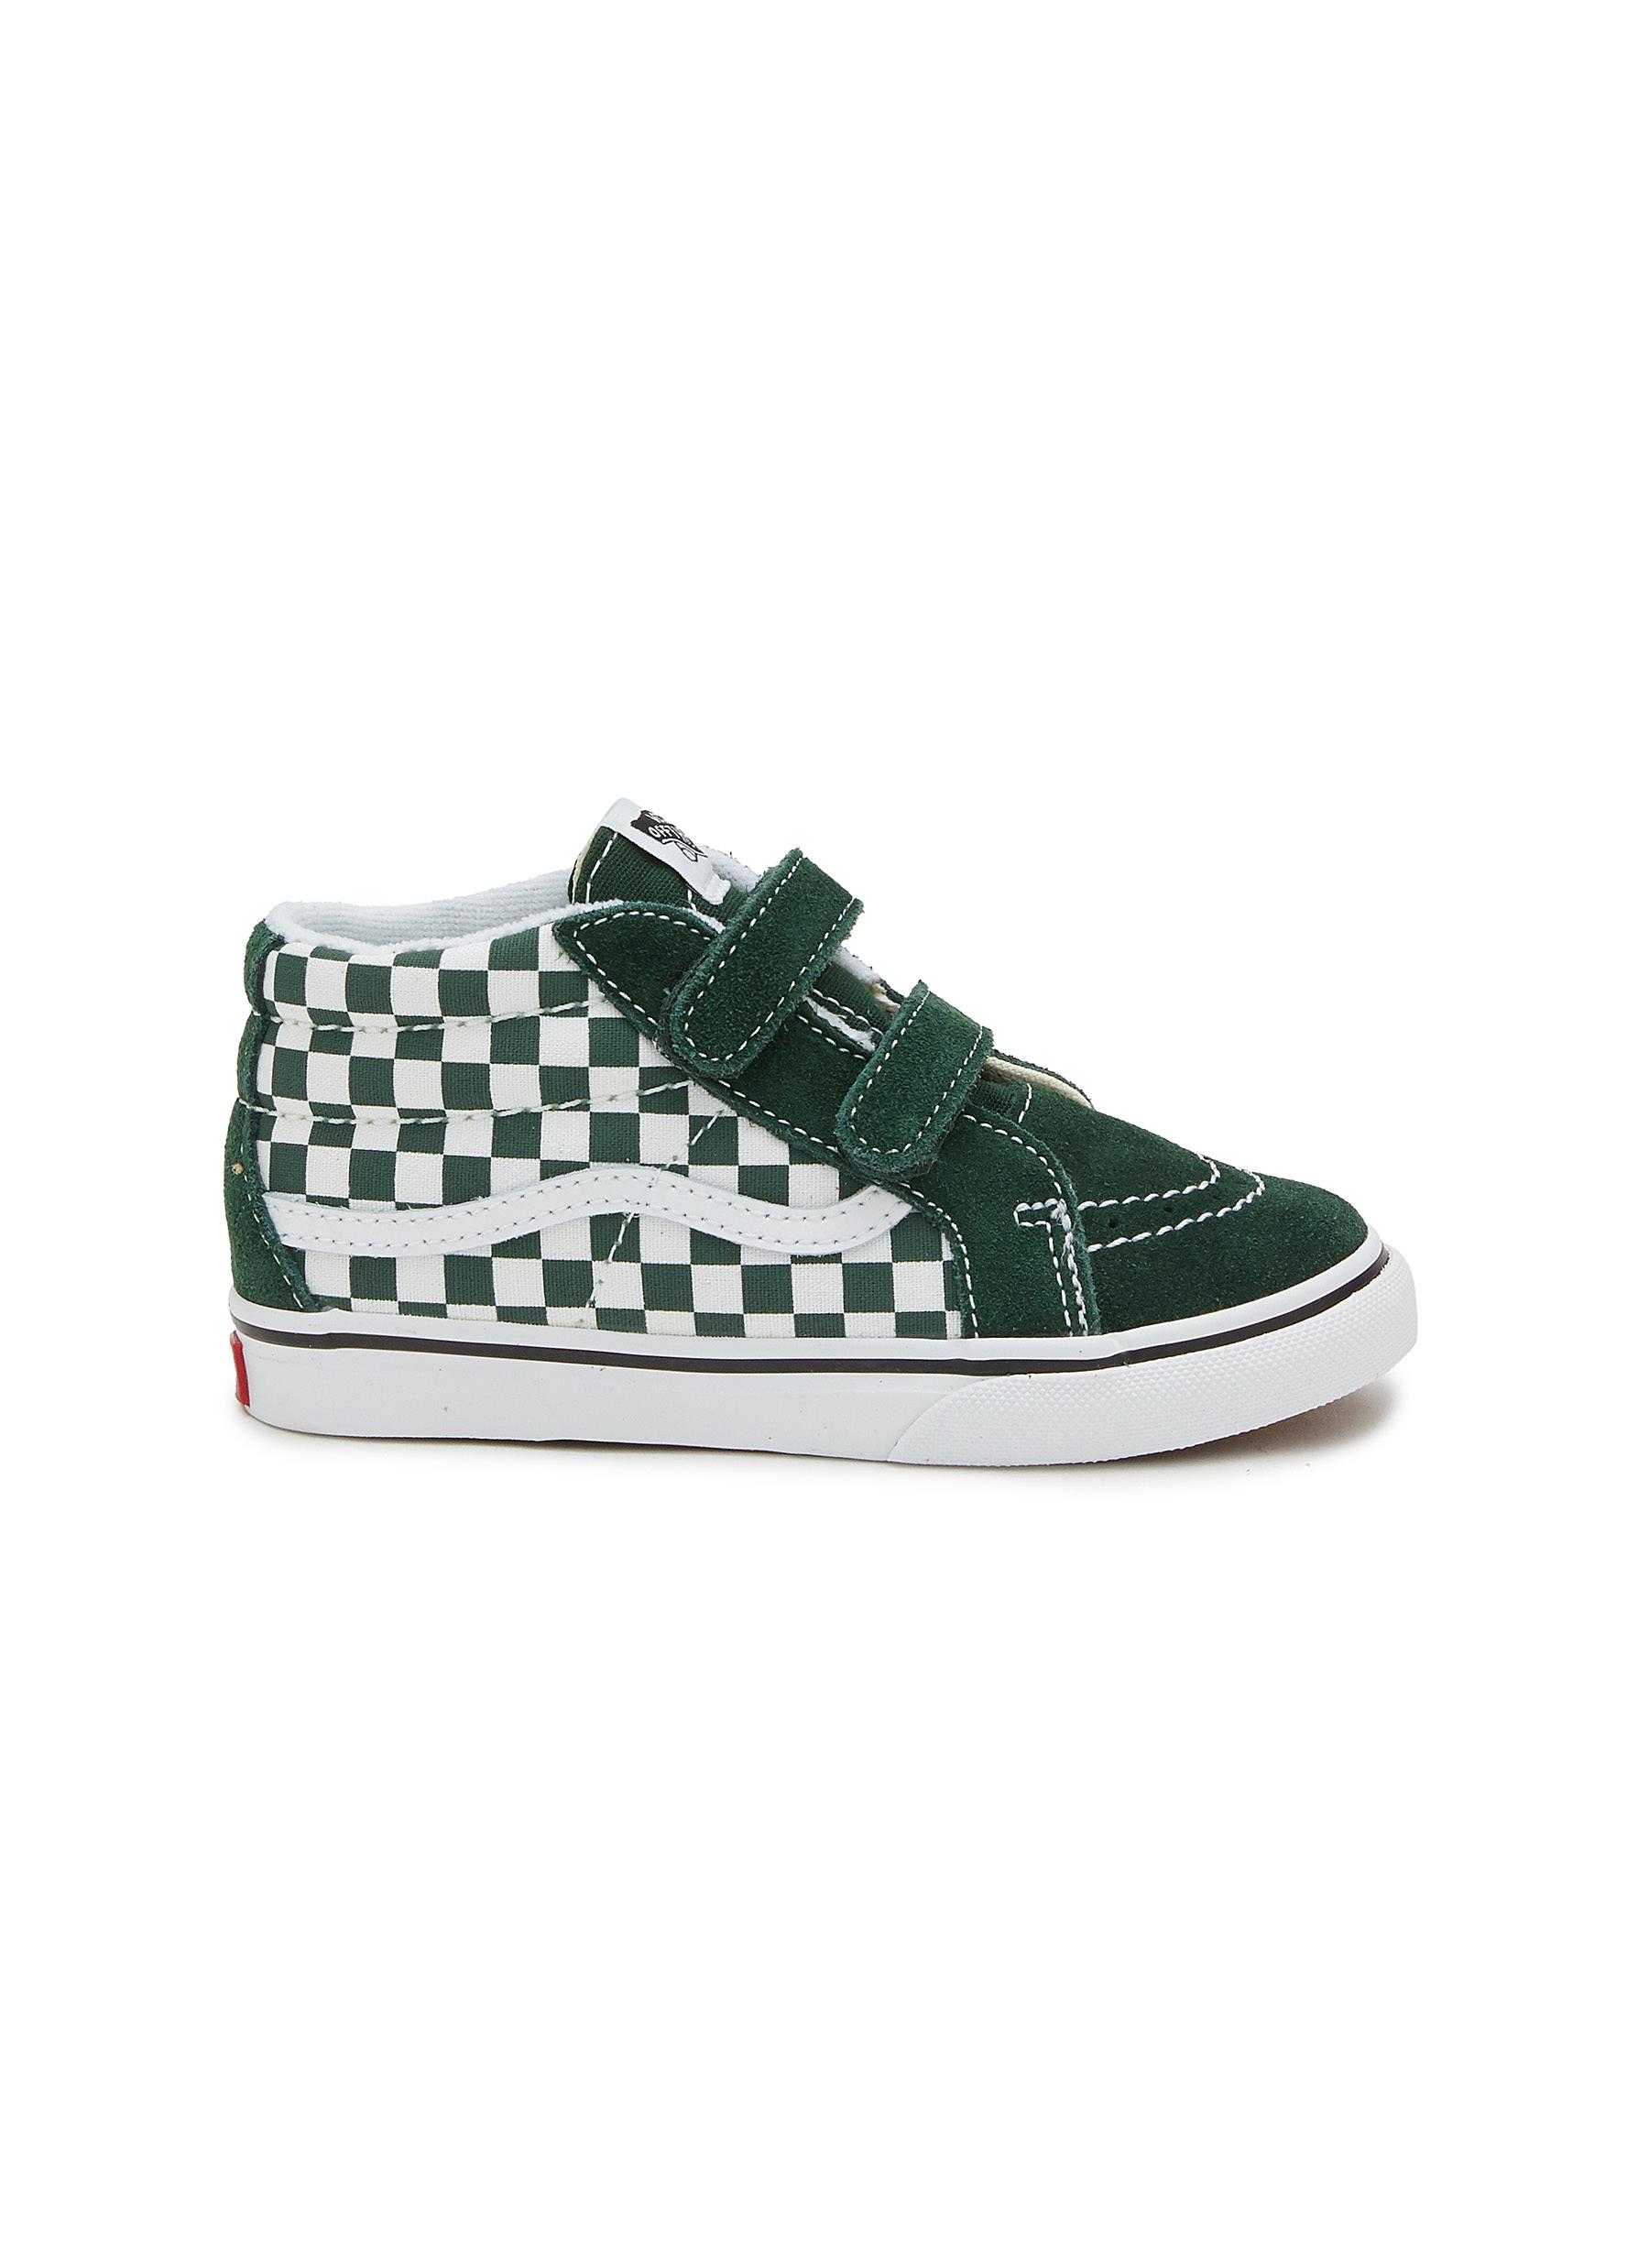 Checkerboard Velcro Toddlers High Top Sneakers